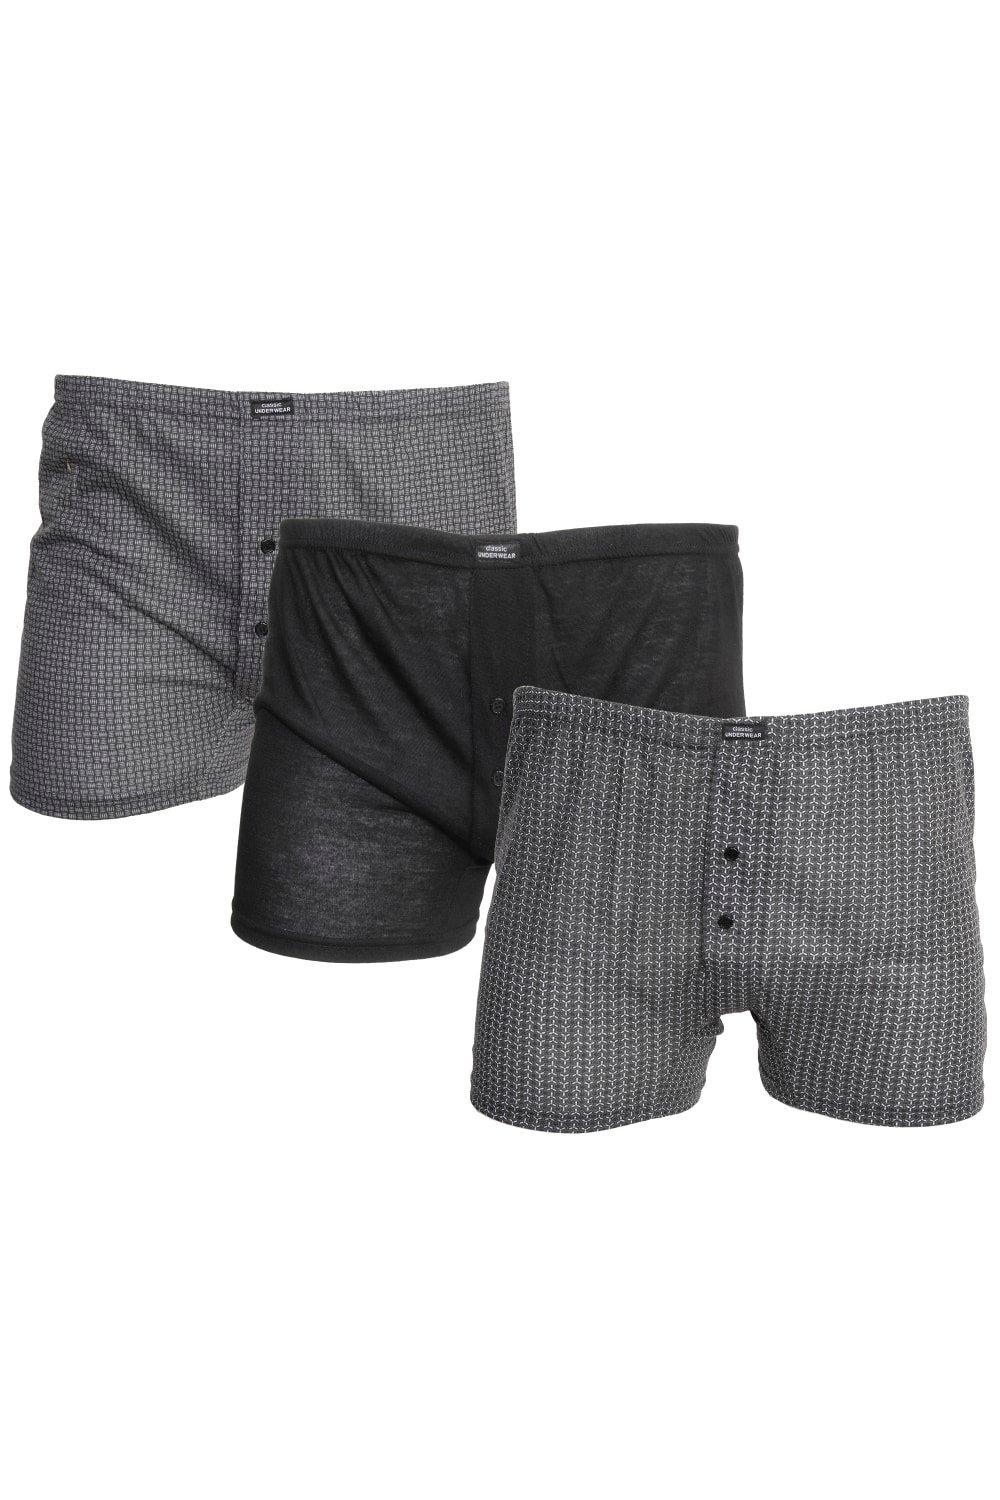 Patterned Jersey Boxer Shorts (3 Pairs)